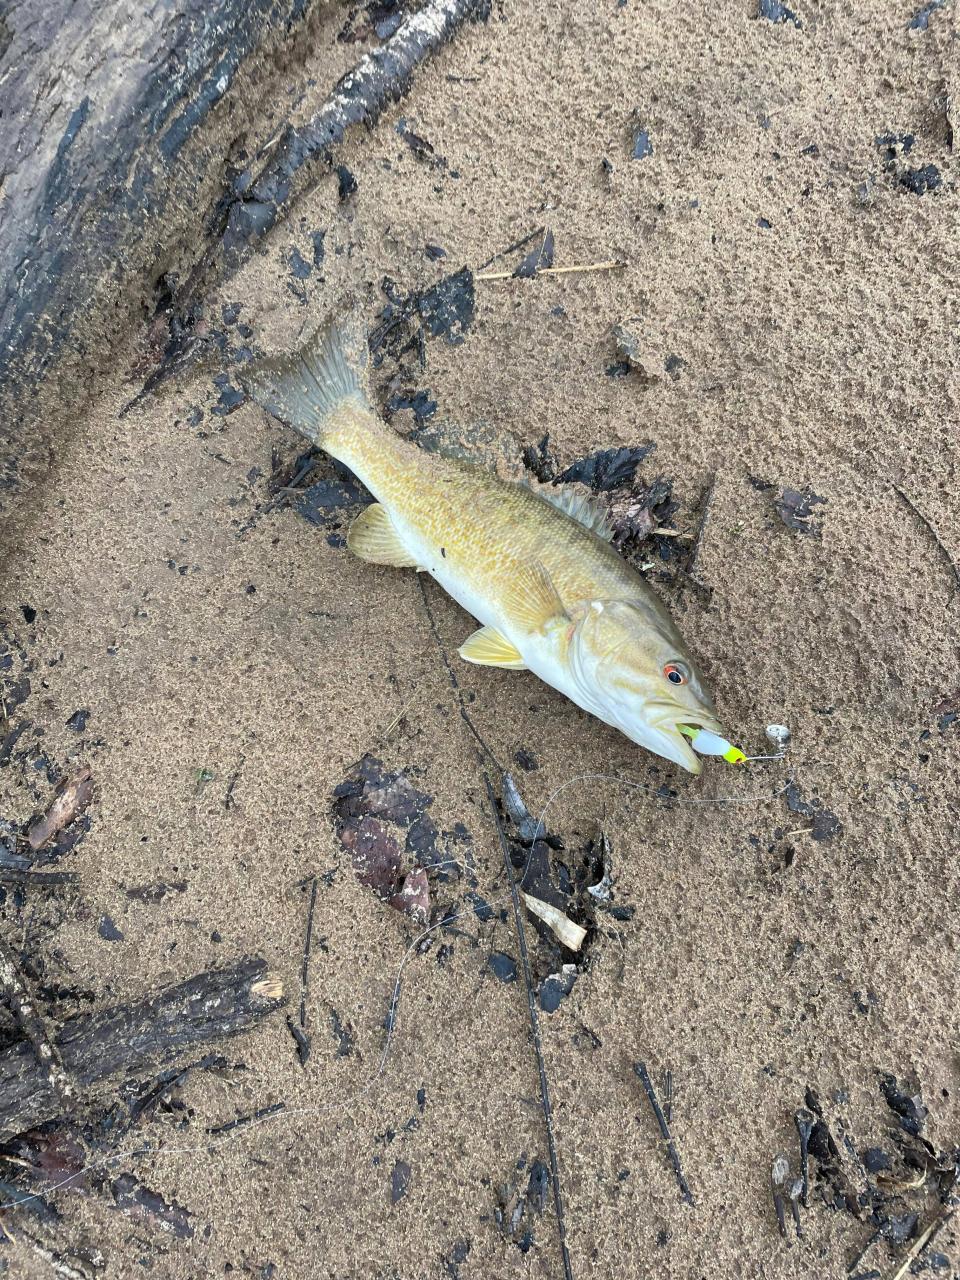 John Blomberg caught a smallmouth bass and, along with it, came a lamprey.